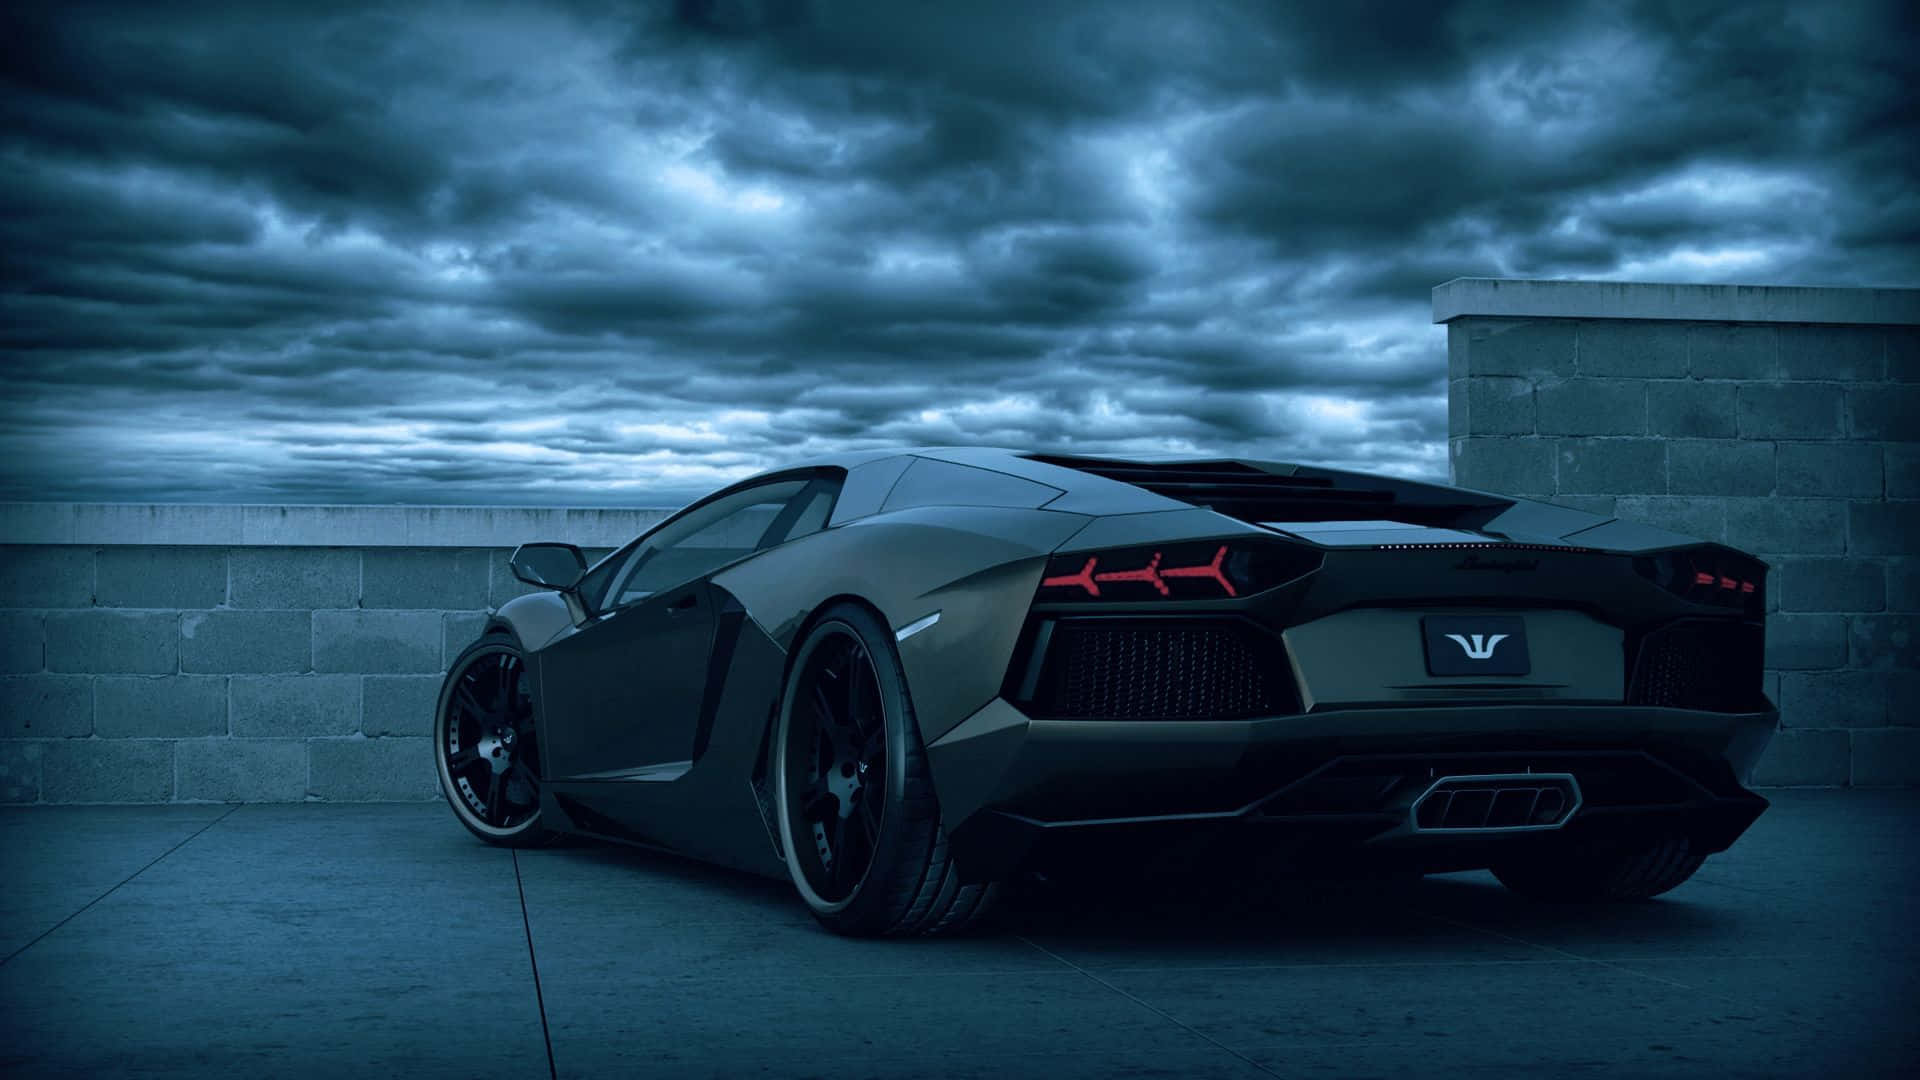 Experience the Cool and Sporty Design of a Lamborghini Wallpaper